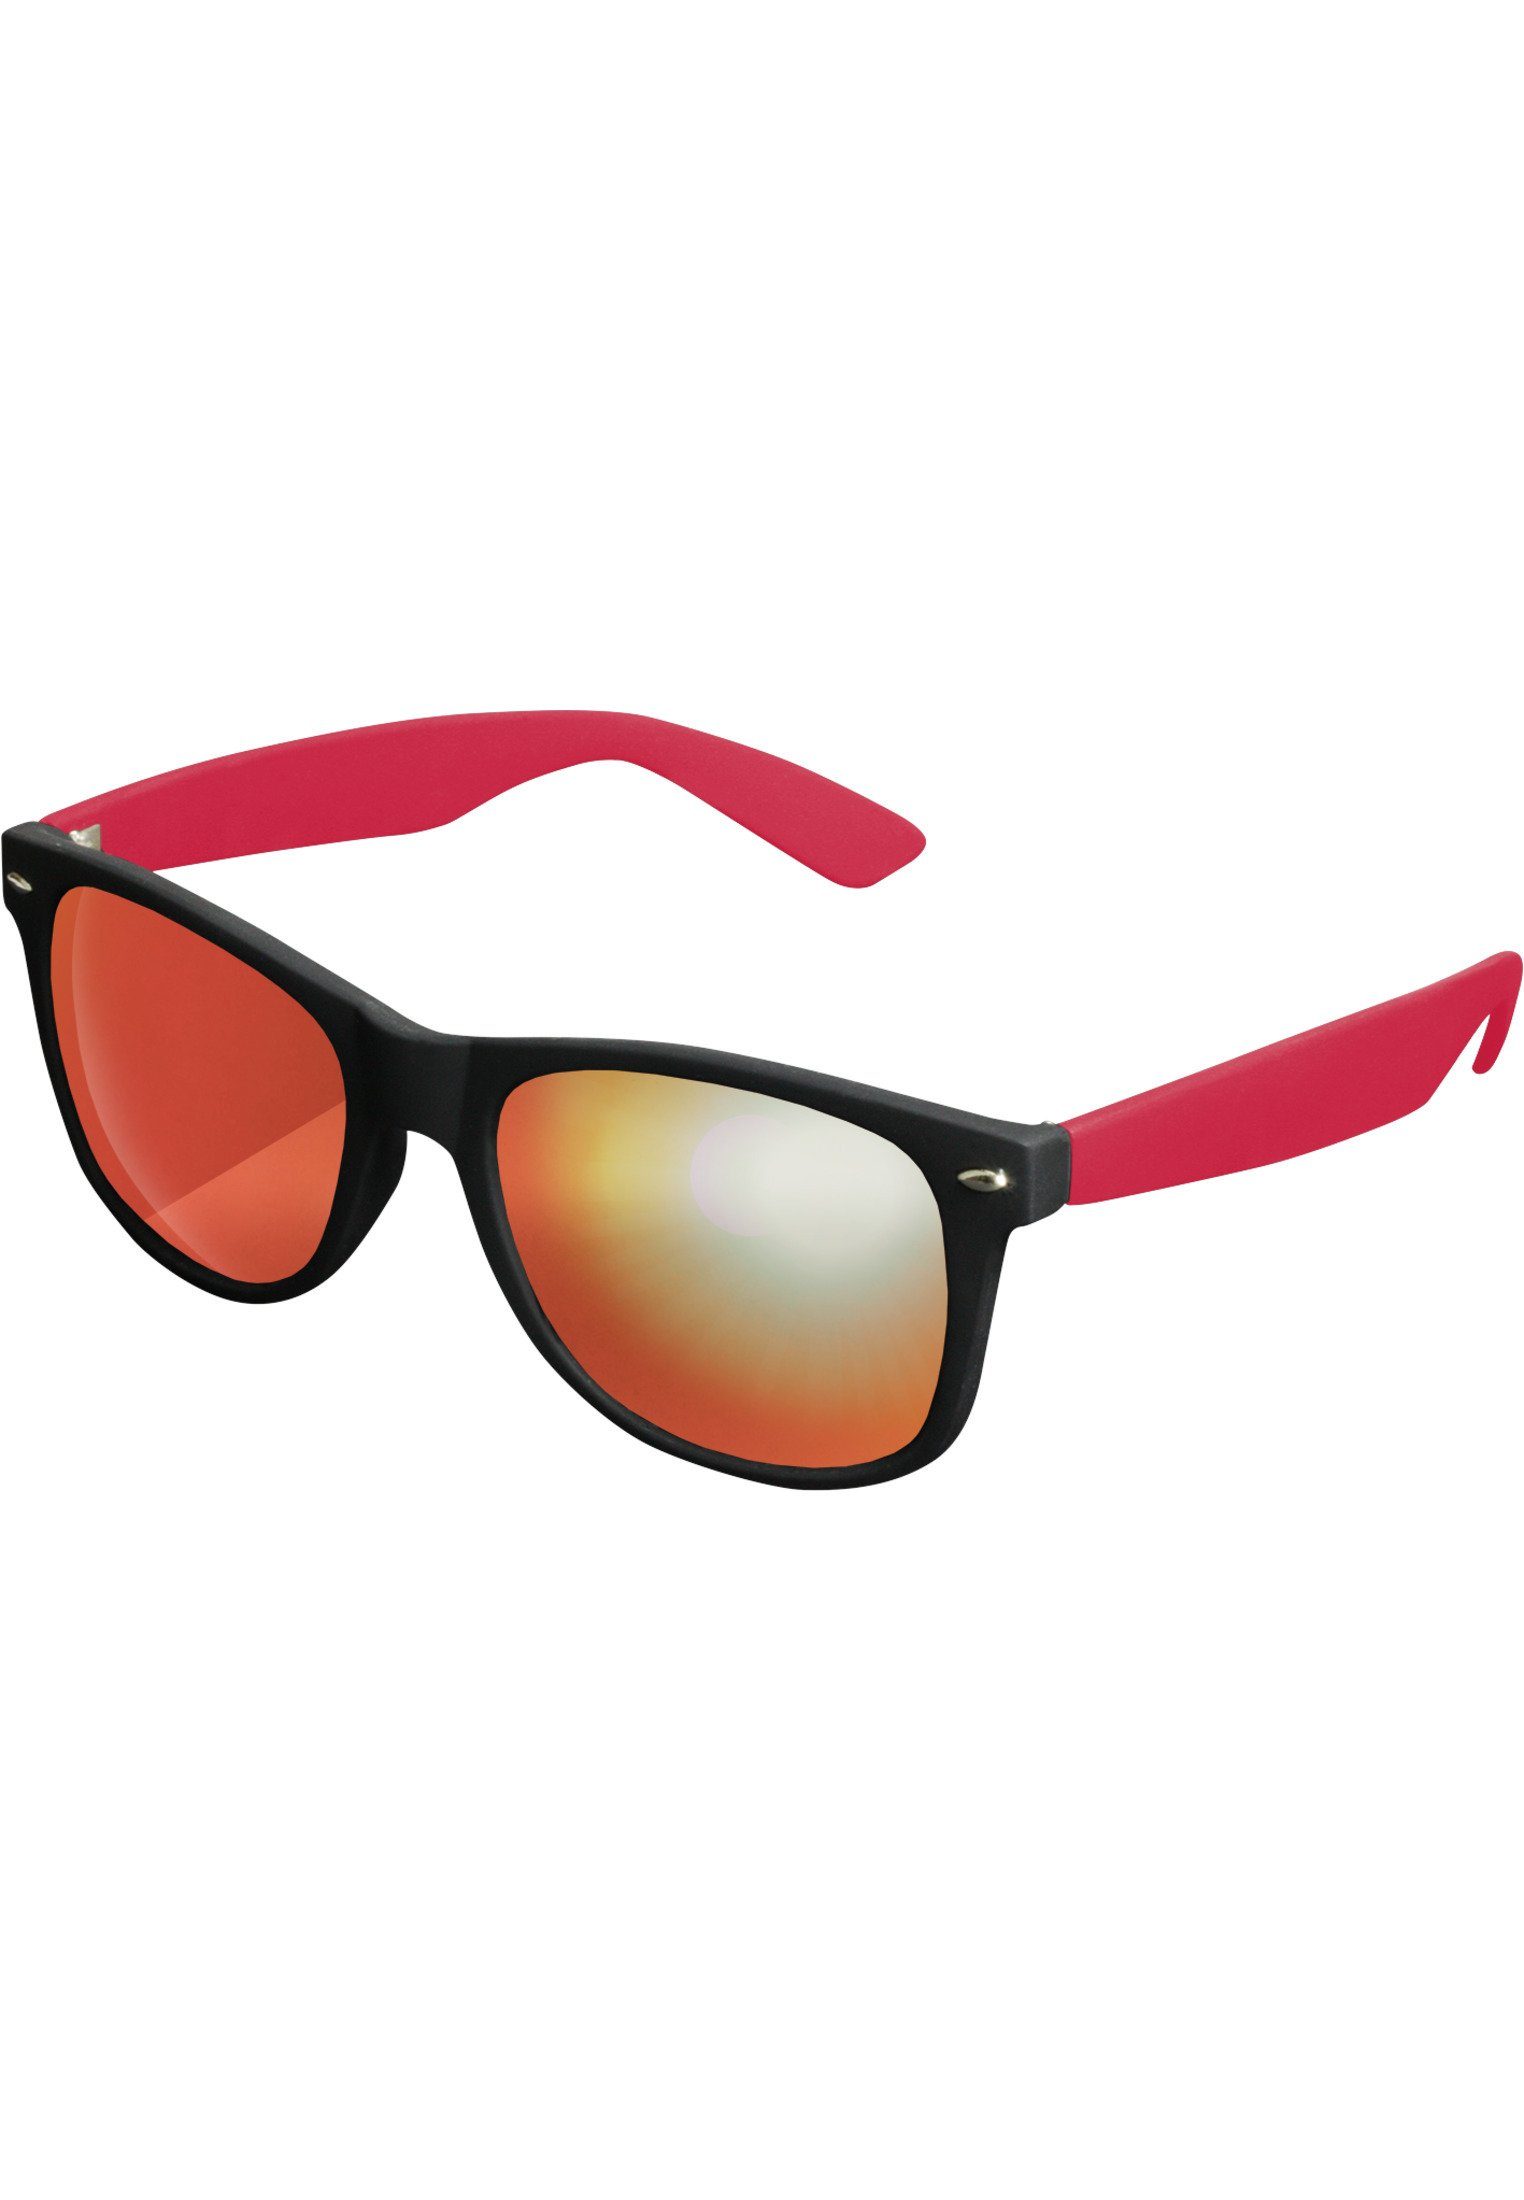 Likoma blk/red/red MSTRDS Mirror Sonnenbrille Accessoires Sunglasses